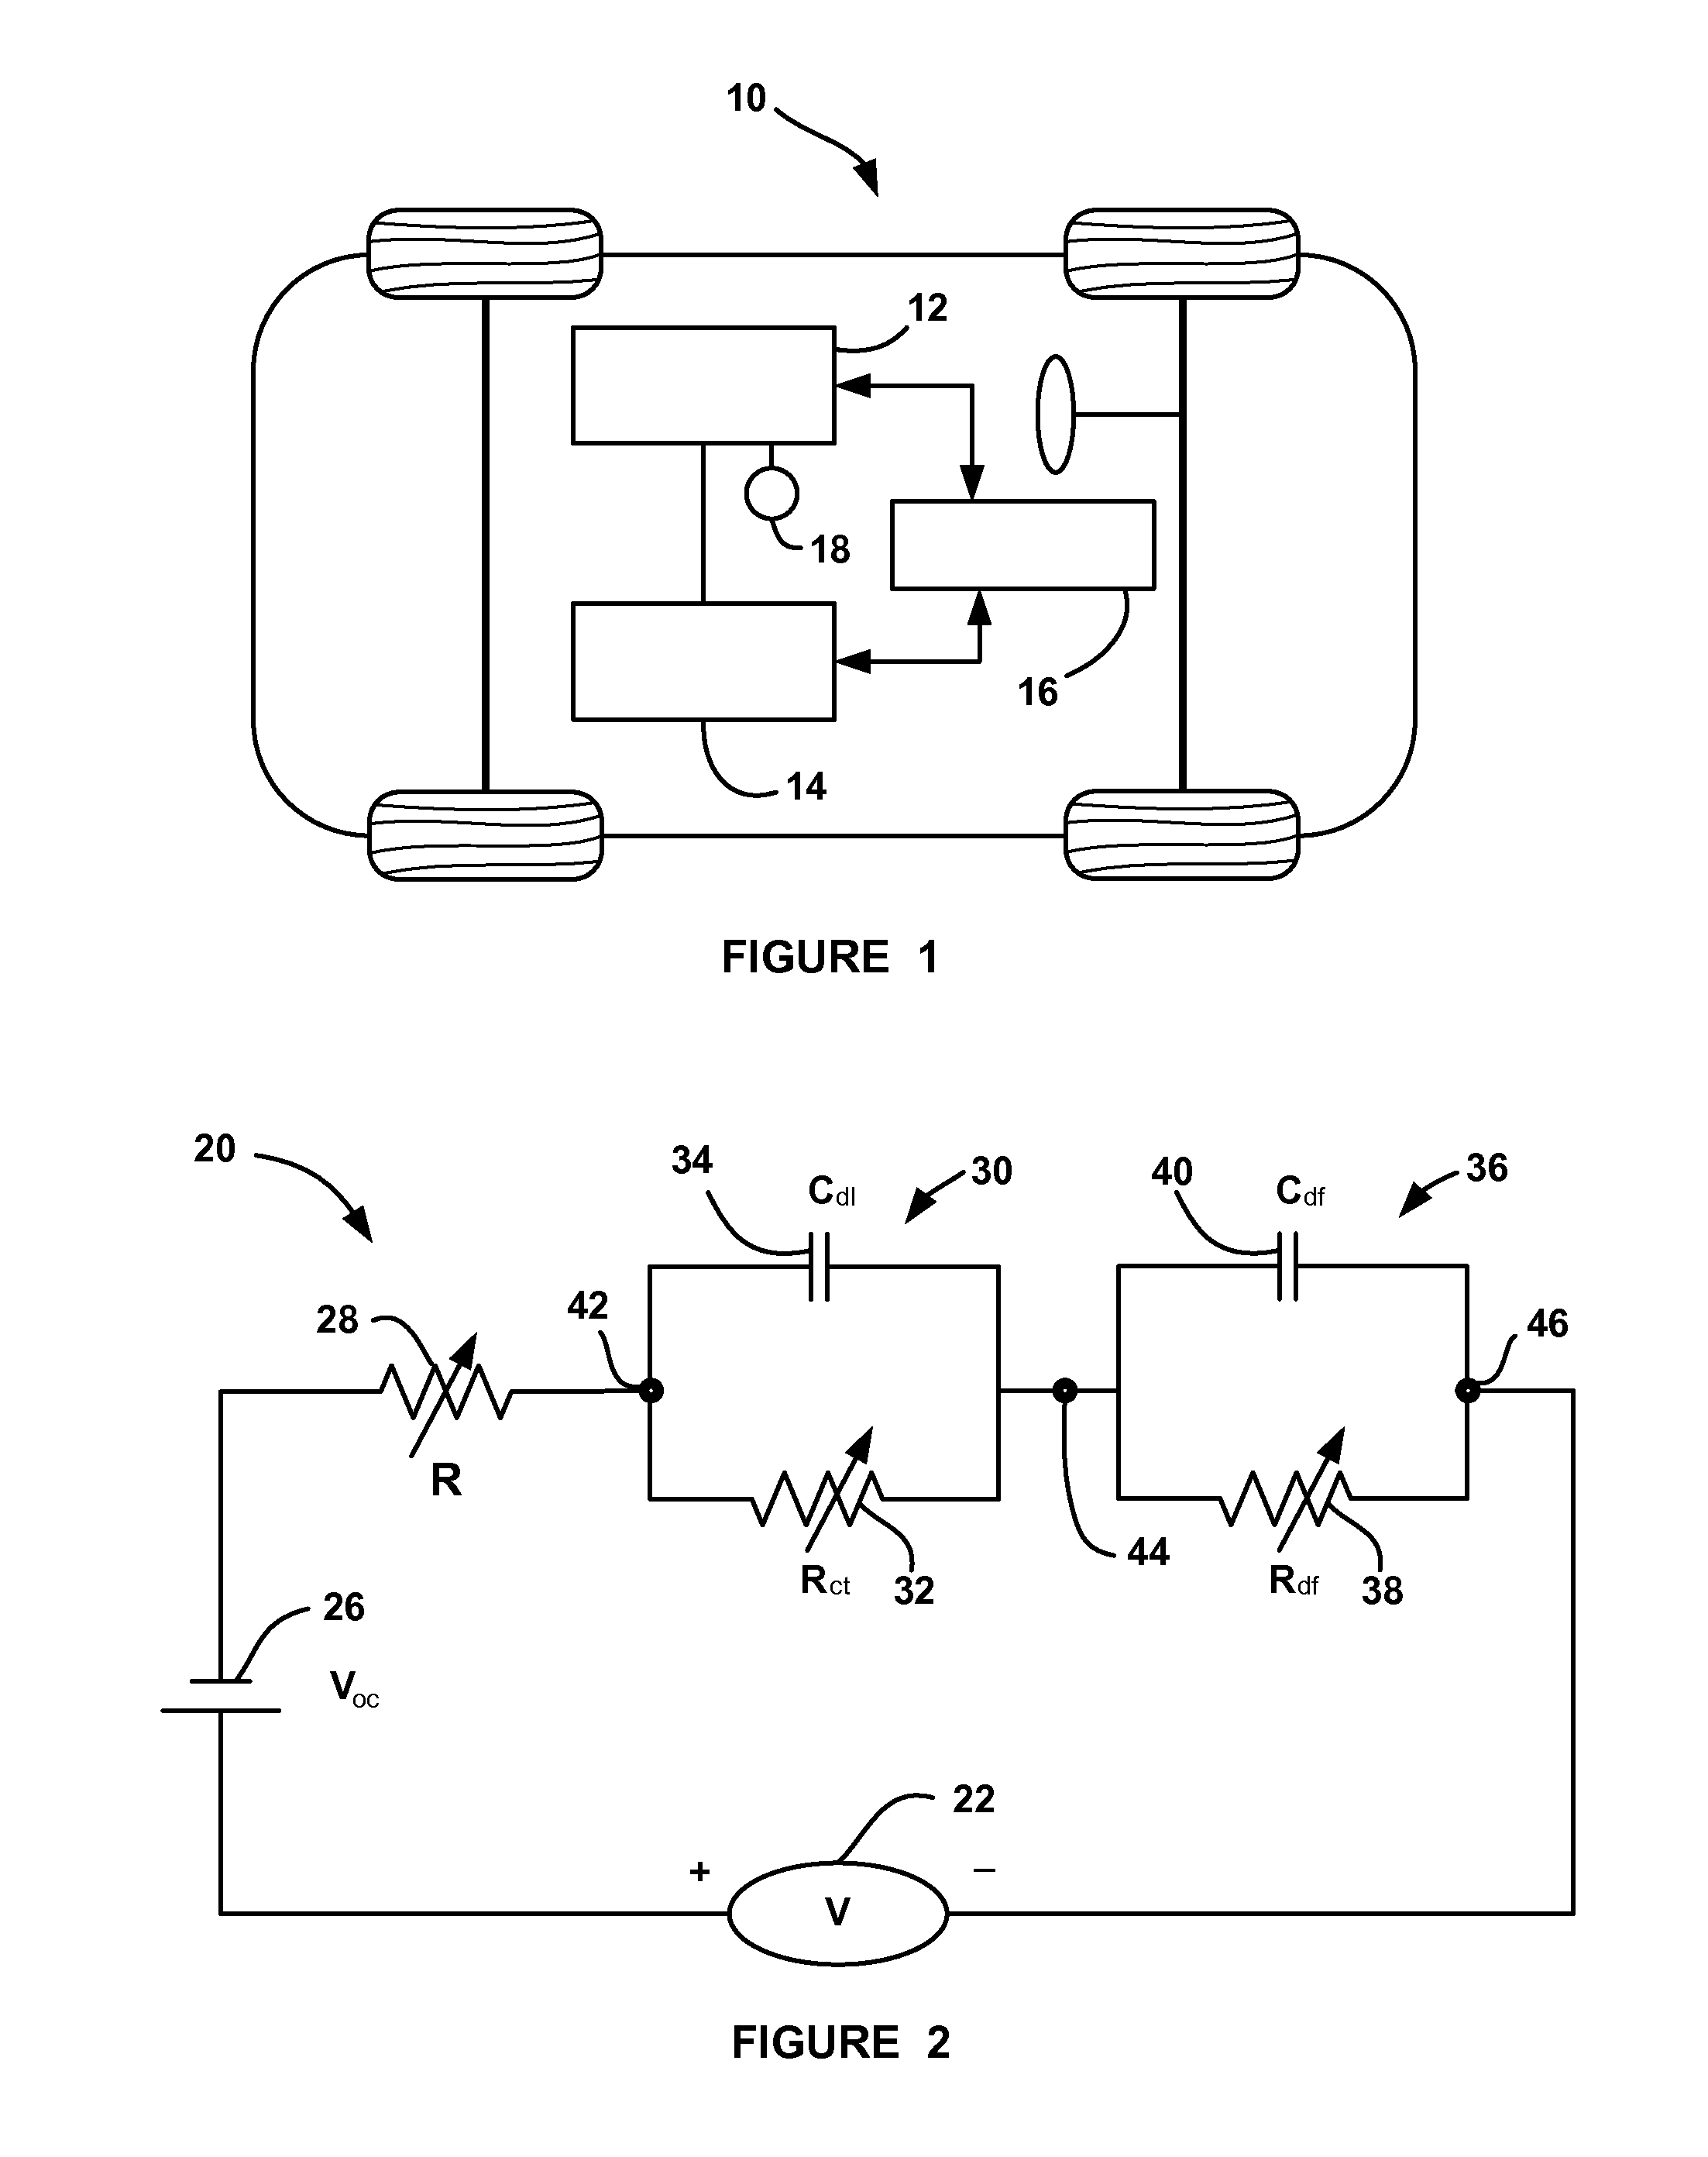 Battery state estimator with overpotential-based variable resistors